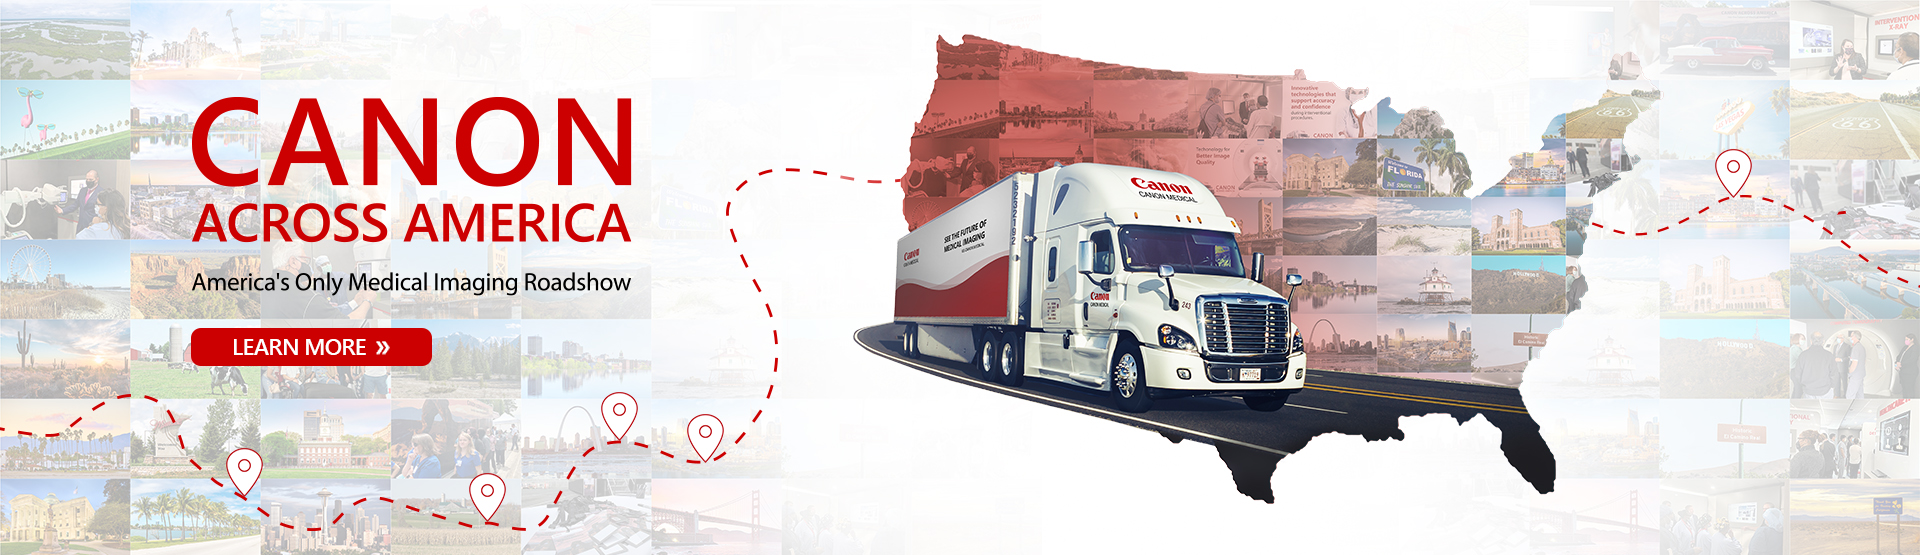 Canon Across America | America's Only Medical Imaging Roadshow | Learn More